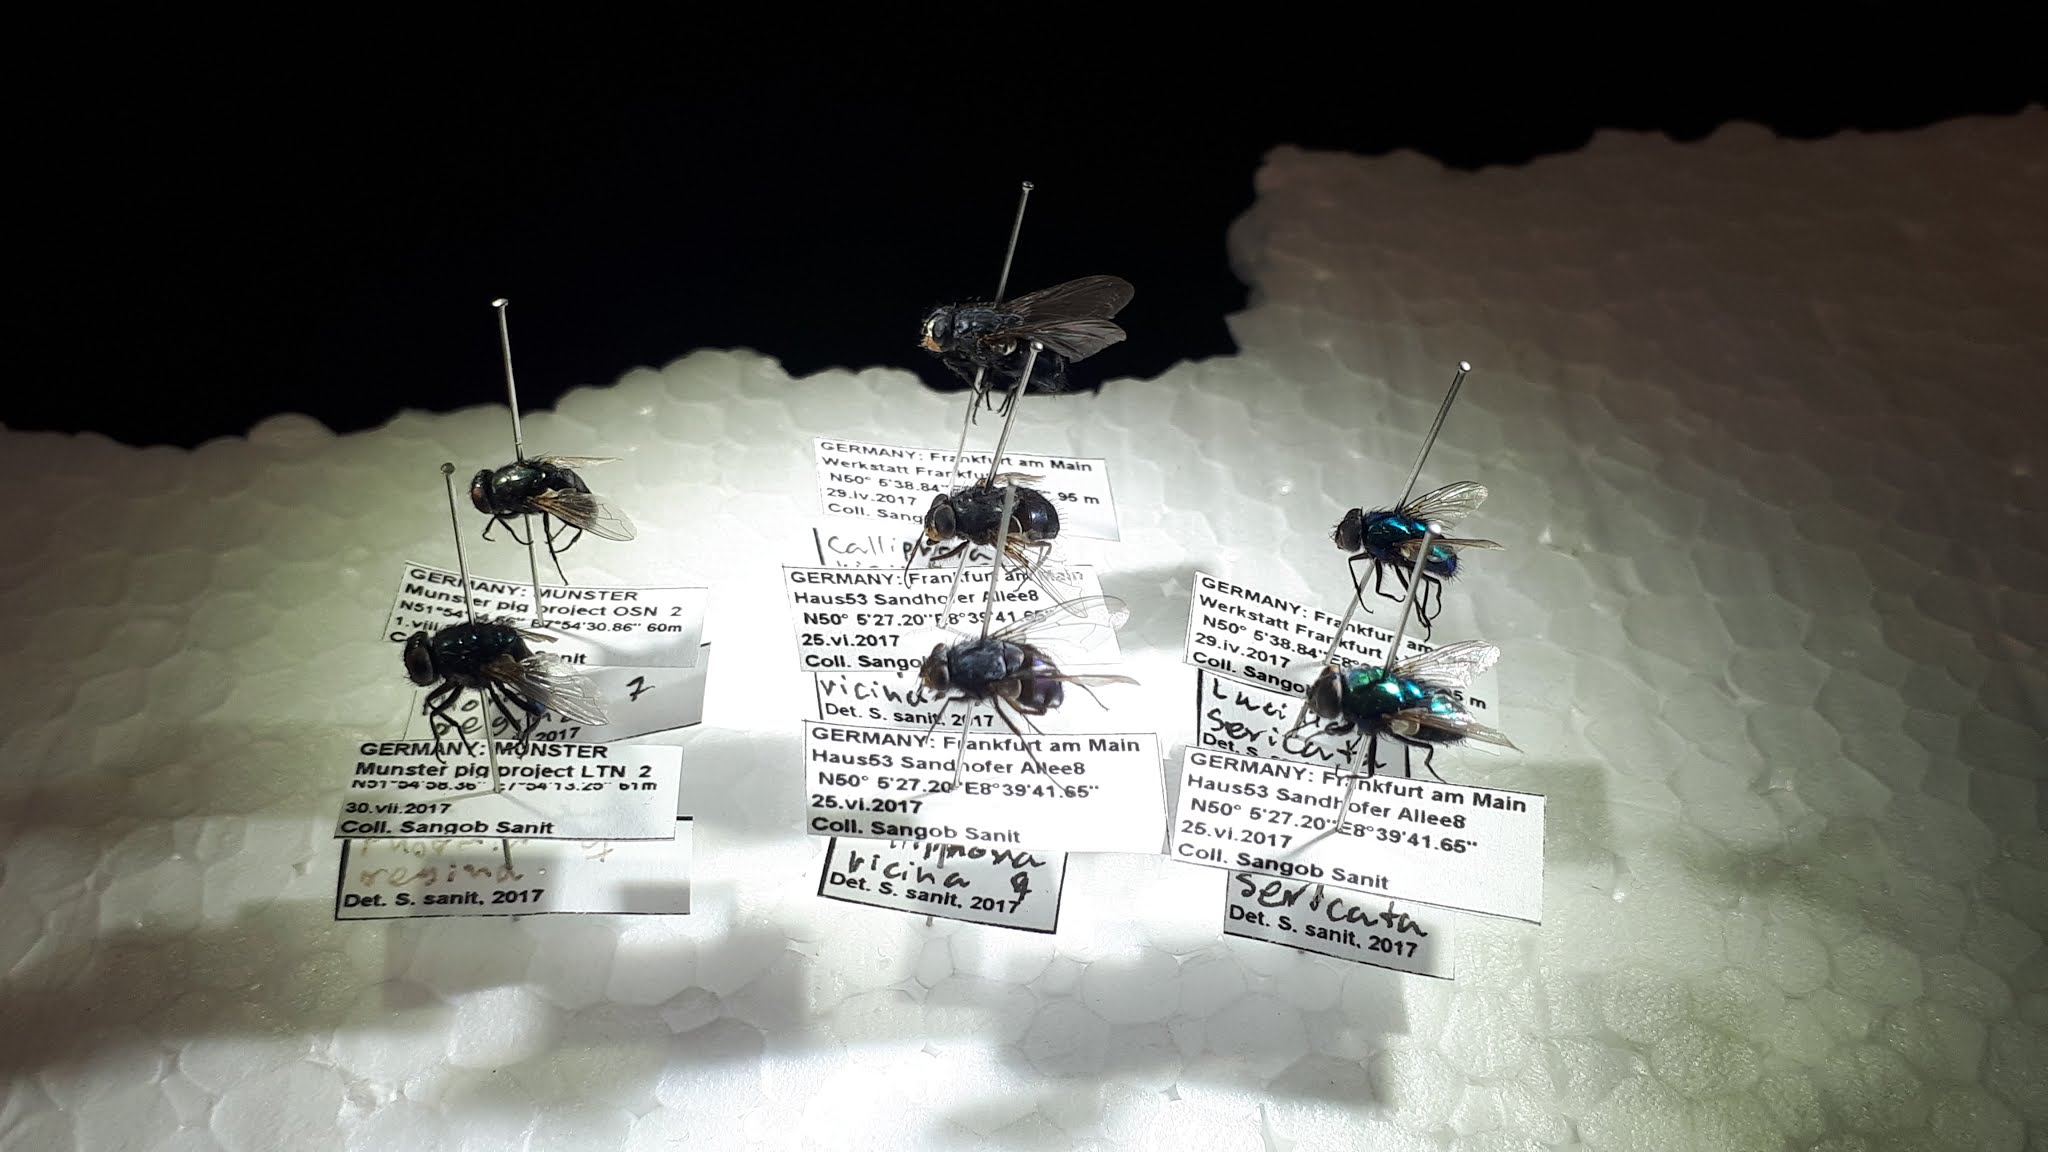 About the Forensic Entomology Process, Solving Cases with the Help of Insects